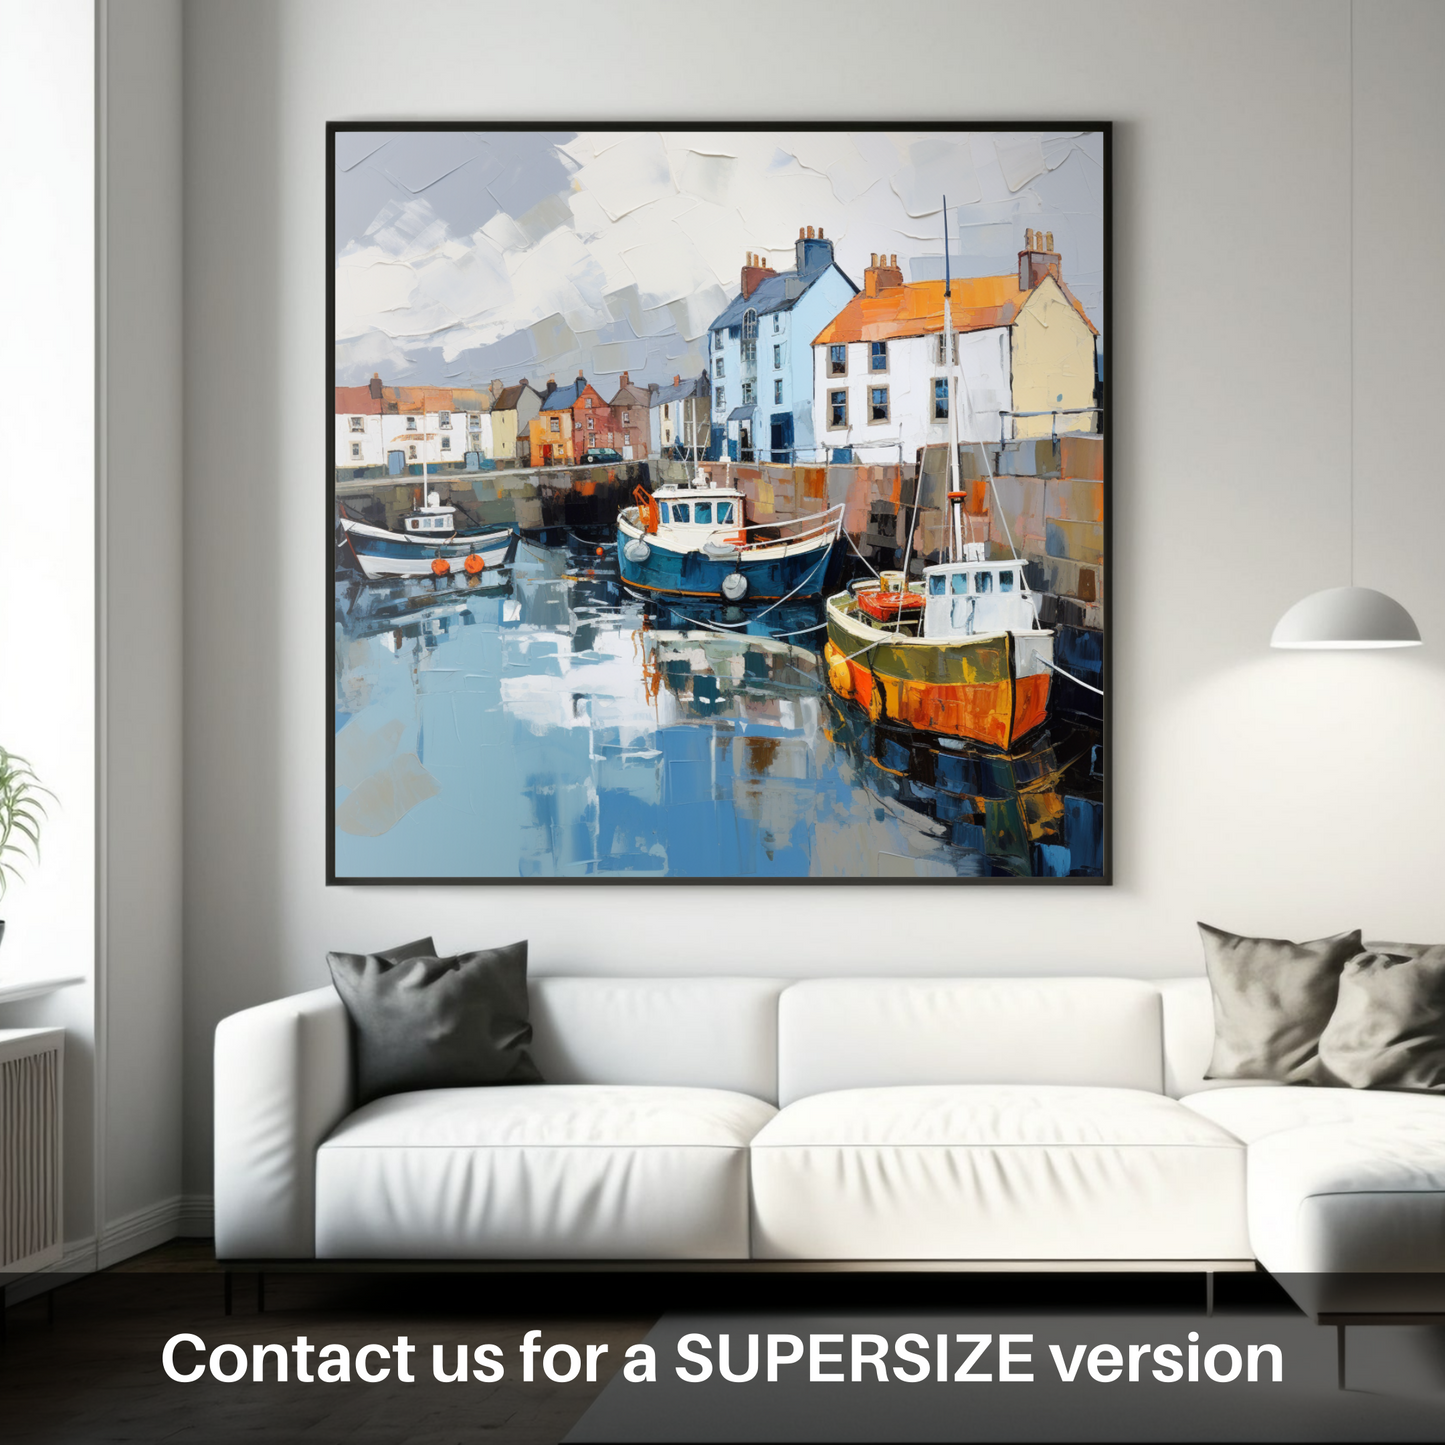 Painting and Art Print of St Monans Harbour with a stormy sky. Storm Over St Monans: An Expressionist Ode to Scottish Harbours.